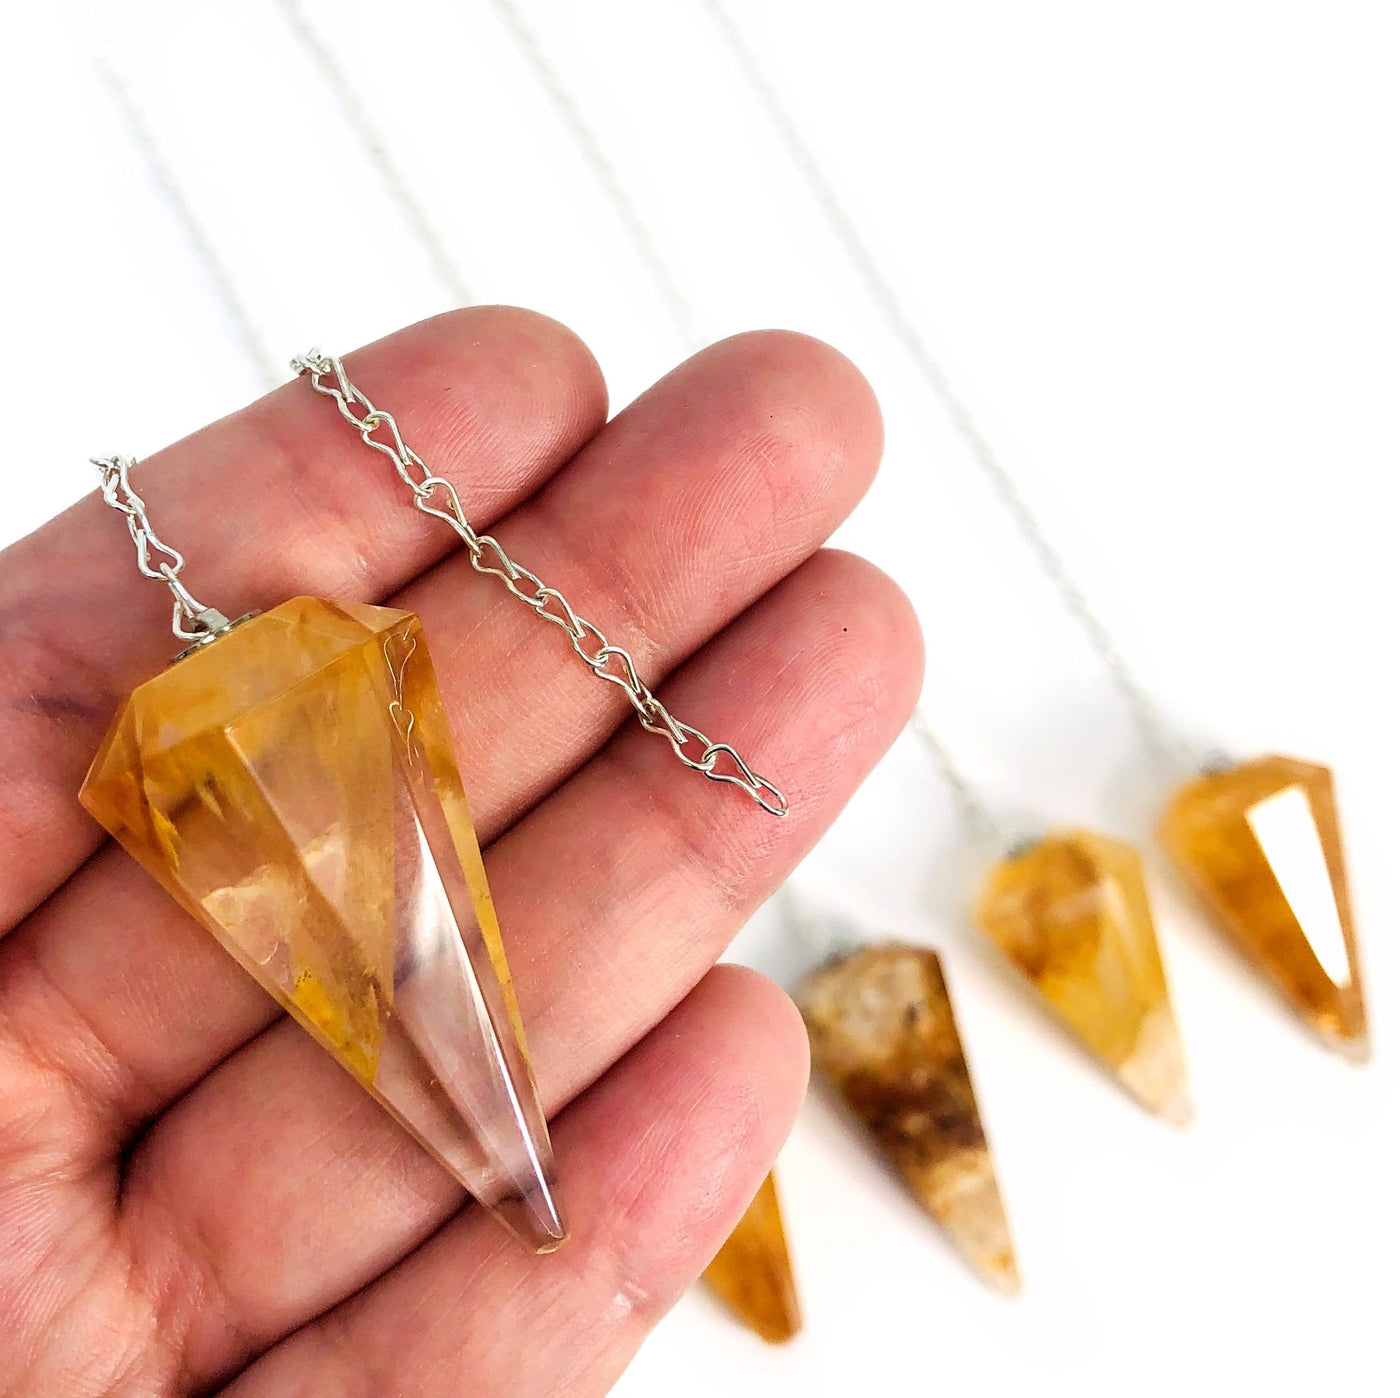 hand holding up golden healer quartz pendulum with others in the background